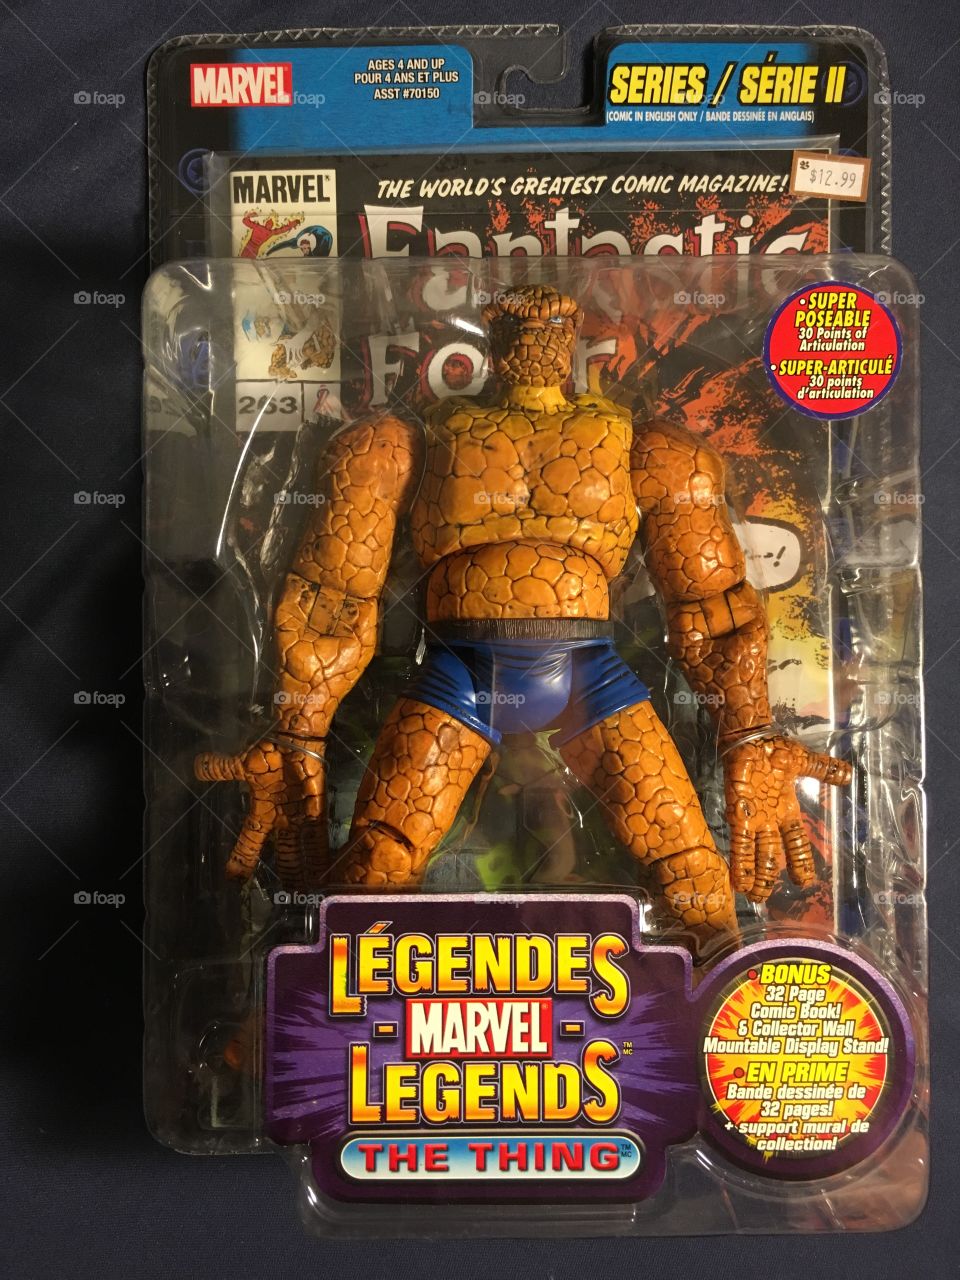 The Thing - Marvel Legends Series 2
Action Figure with comic book. 
Released - 2002